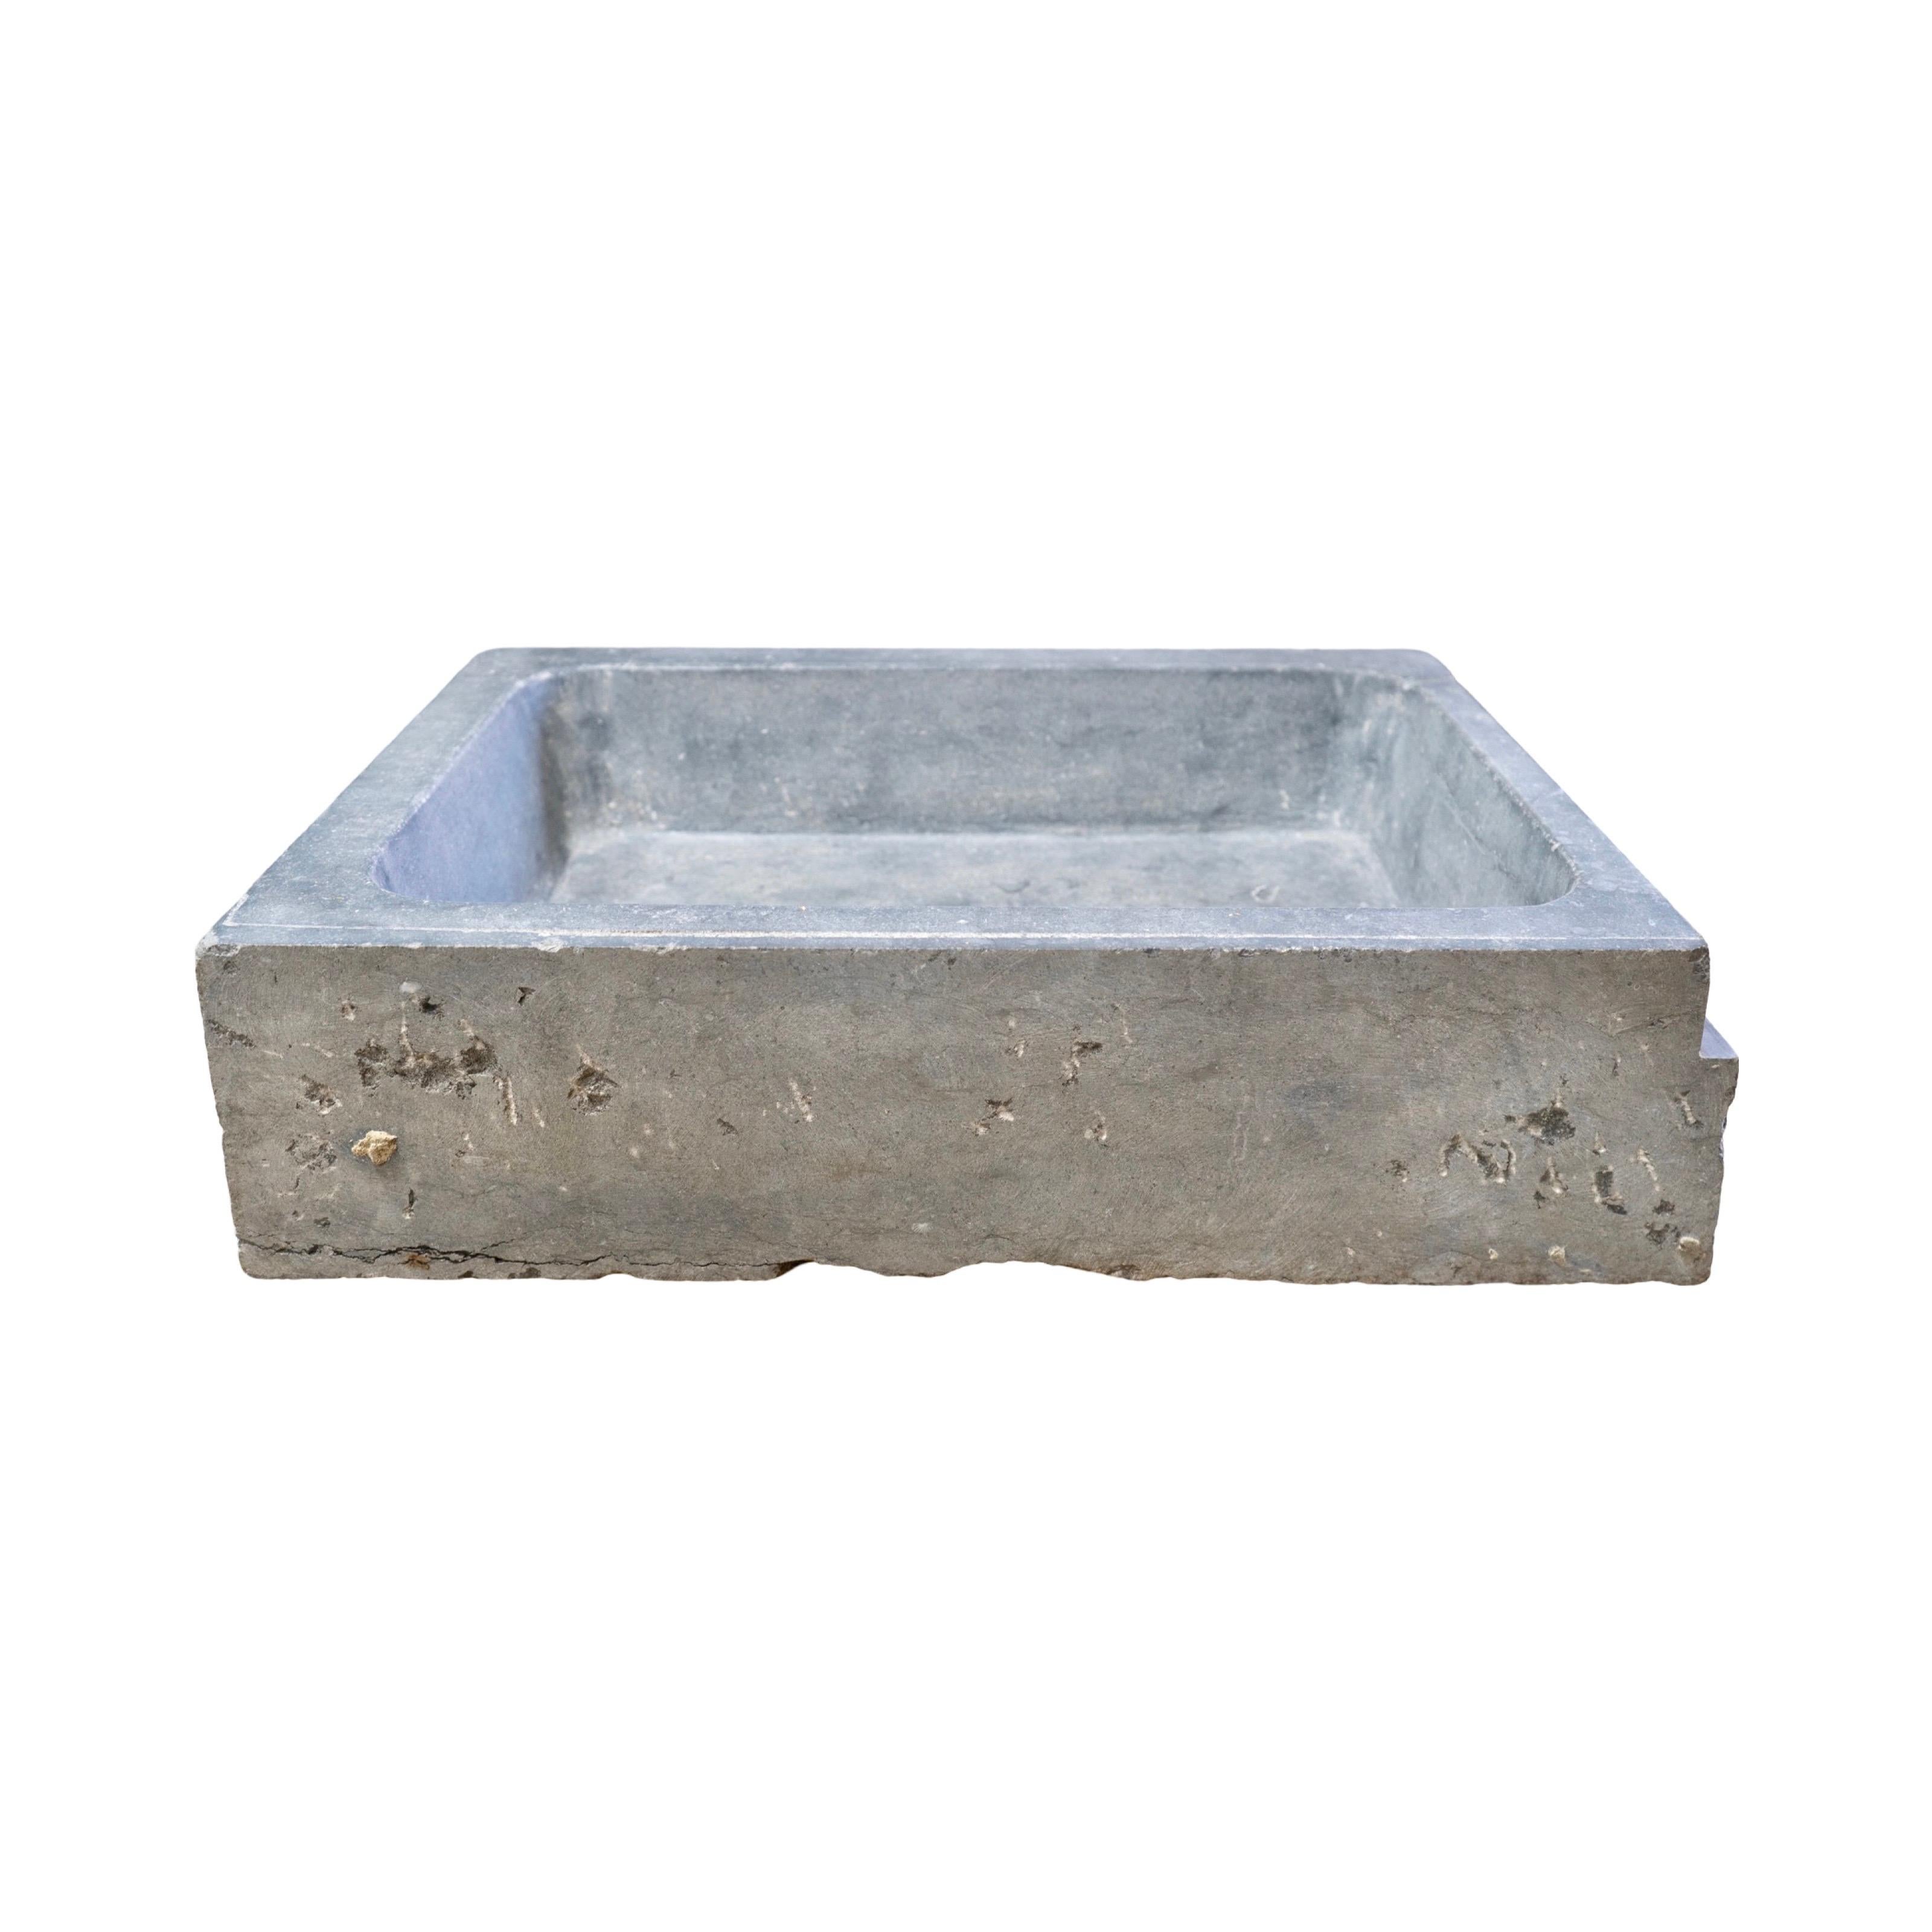 The Belgian Bluestone Sink, made from authentic bluestone sourced from Belgium in the early 1900s, is a unique and timeless addition to any bathroom. Its sturdy rectangular shape and pre-drilled drainage hole provide both aesthetic and functional